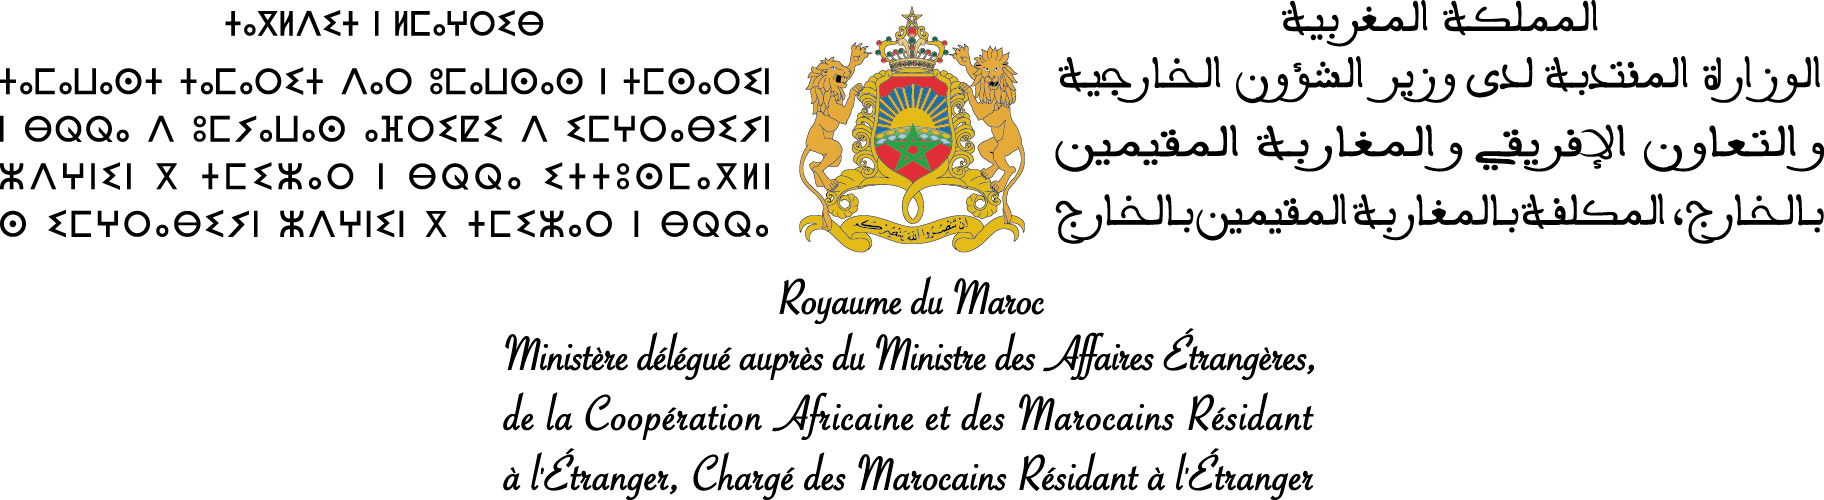 Ministry Delegate to the Ministry of Foreign Affairs, African Cooperation and Moroccans Residing Abroad, responsible for Moroccans residing abroad